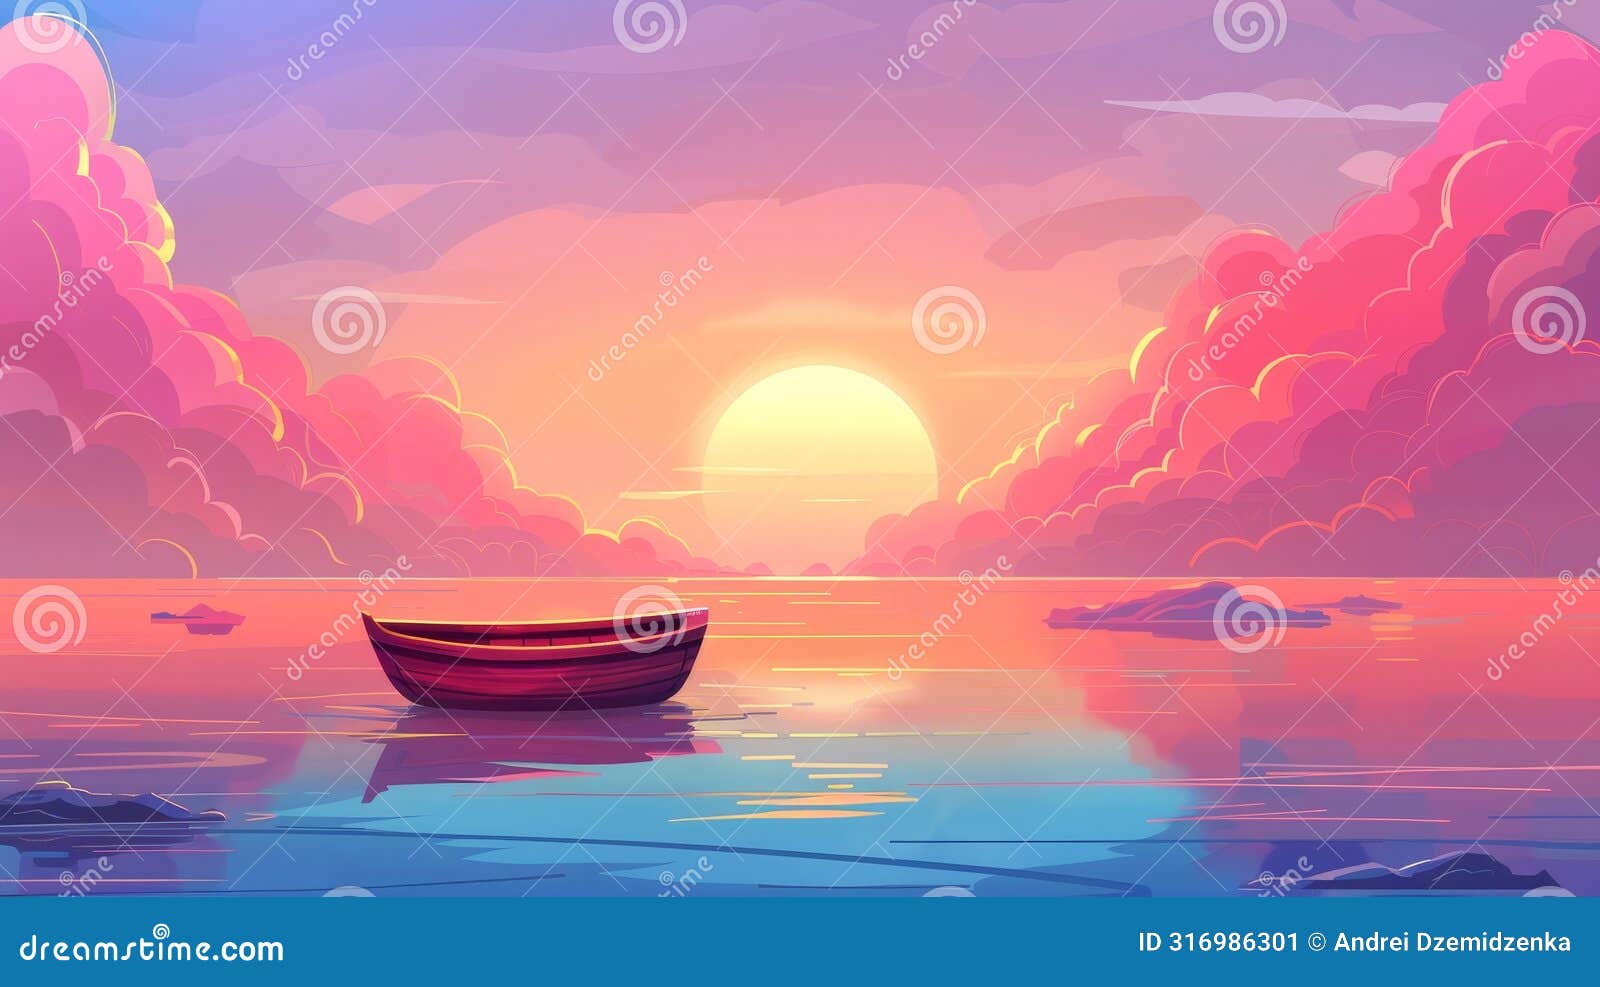 floating wooden skiff floating under pink sky on calm water surface, sidescroller for game, cartoon modern .